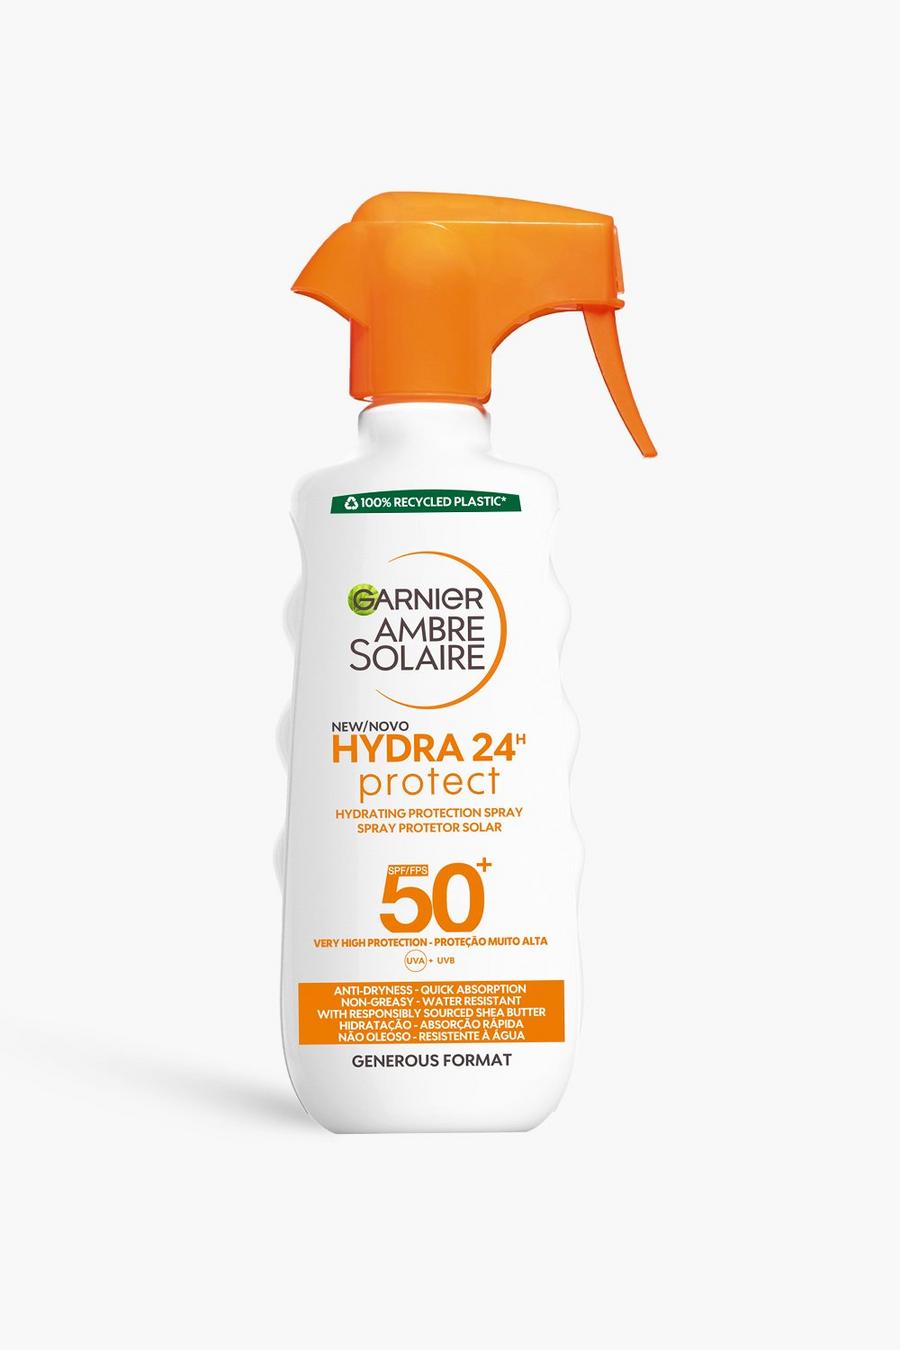 White Garnier Ambre Solaire Hydra 24 Hour Protect Hydrating Protection Spray SPF50, UVA & UVB Protection, 300ml 